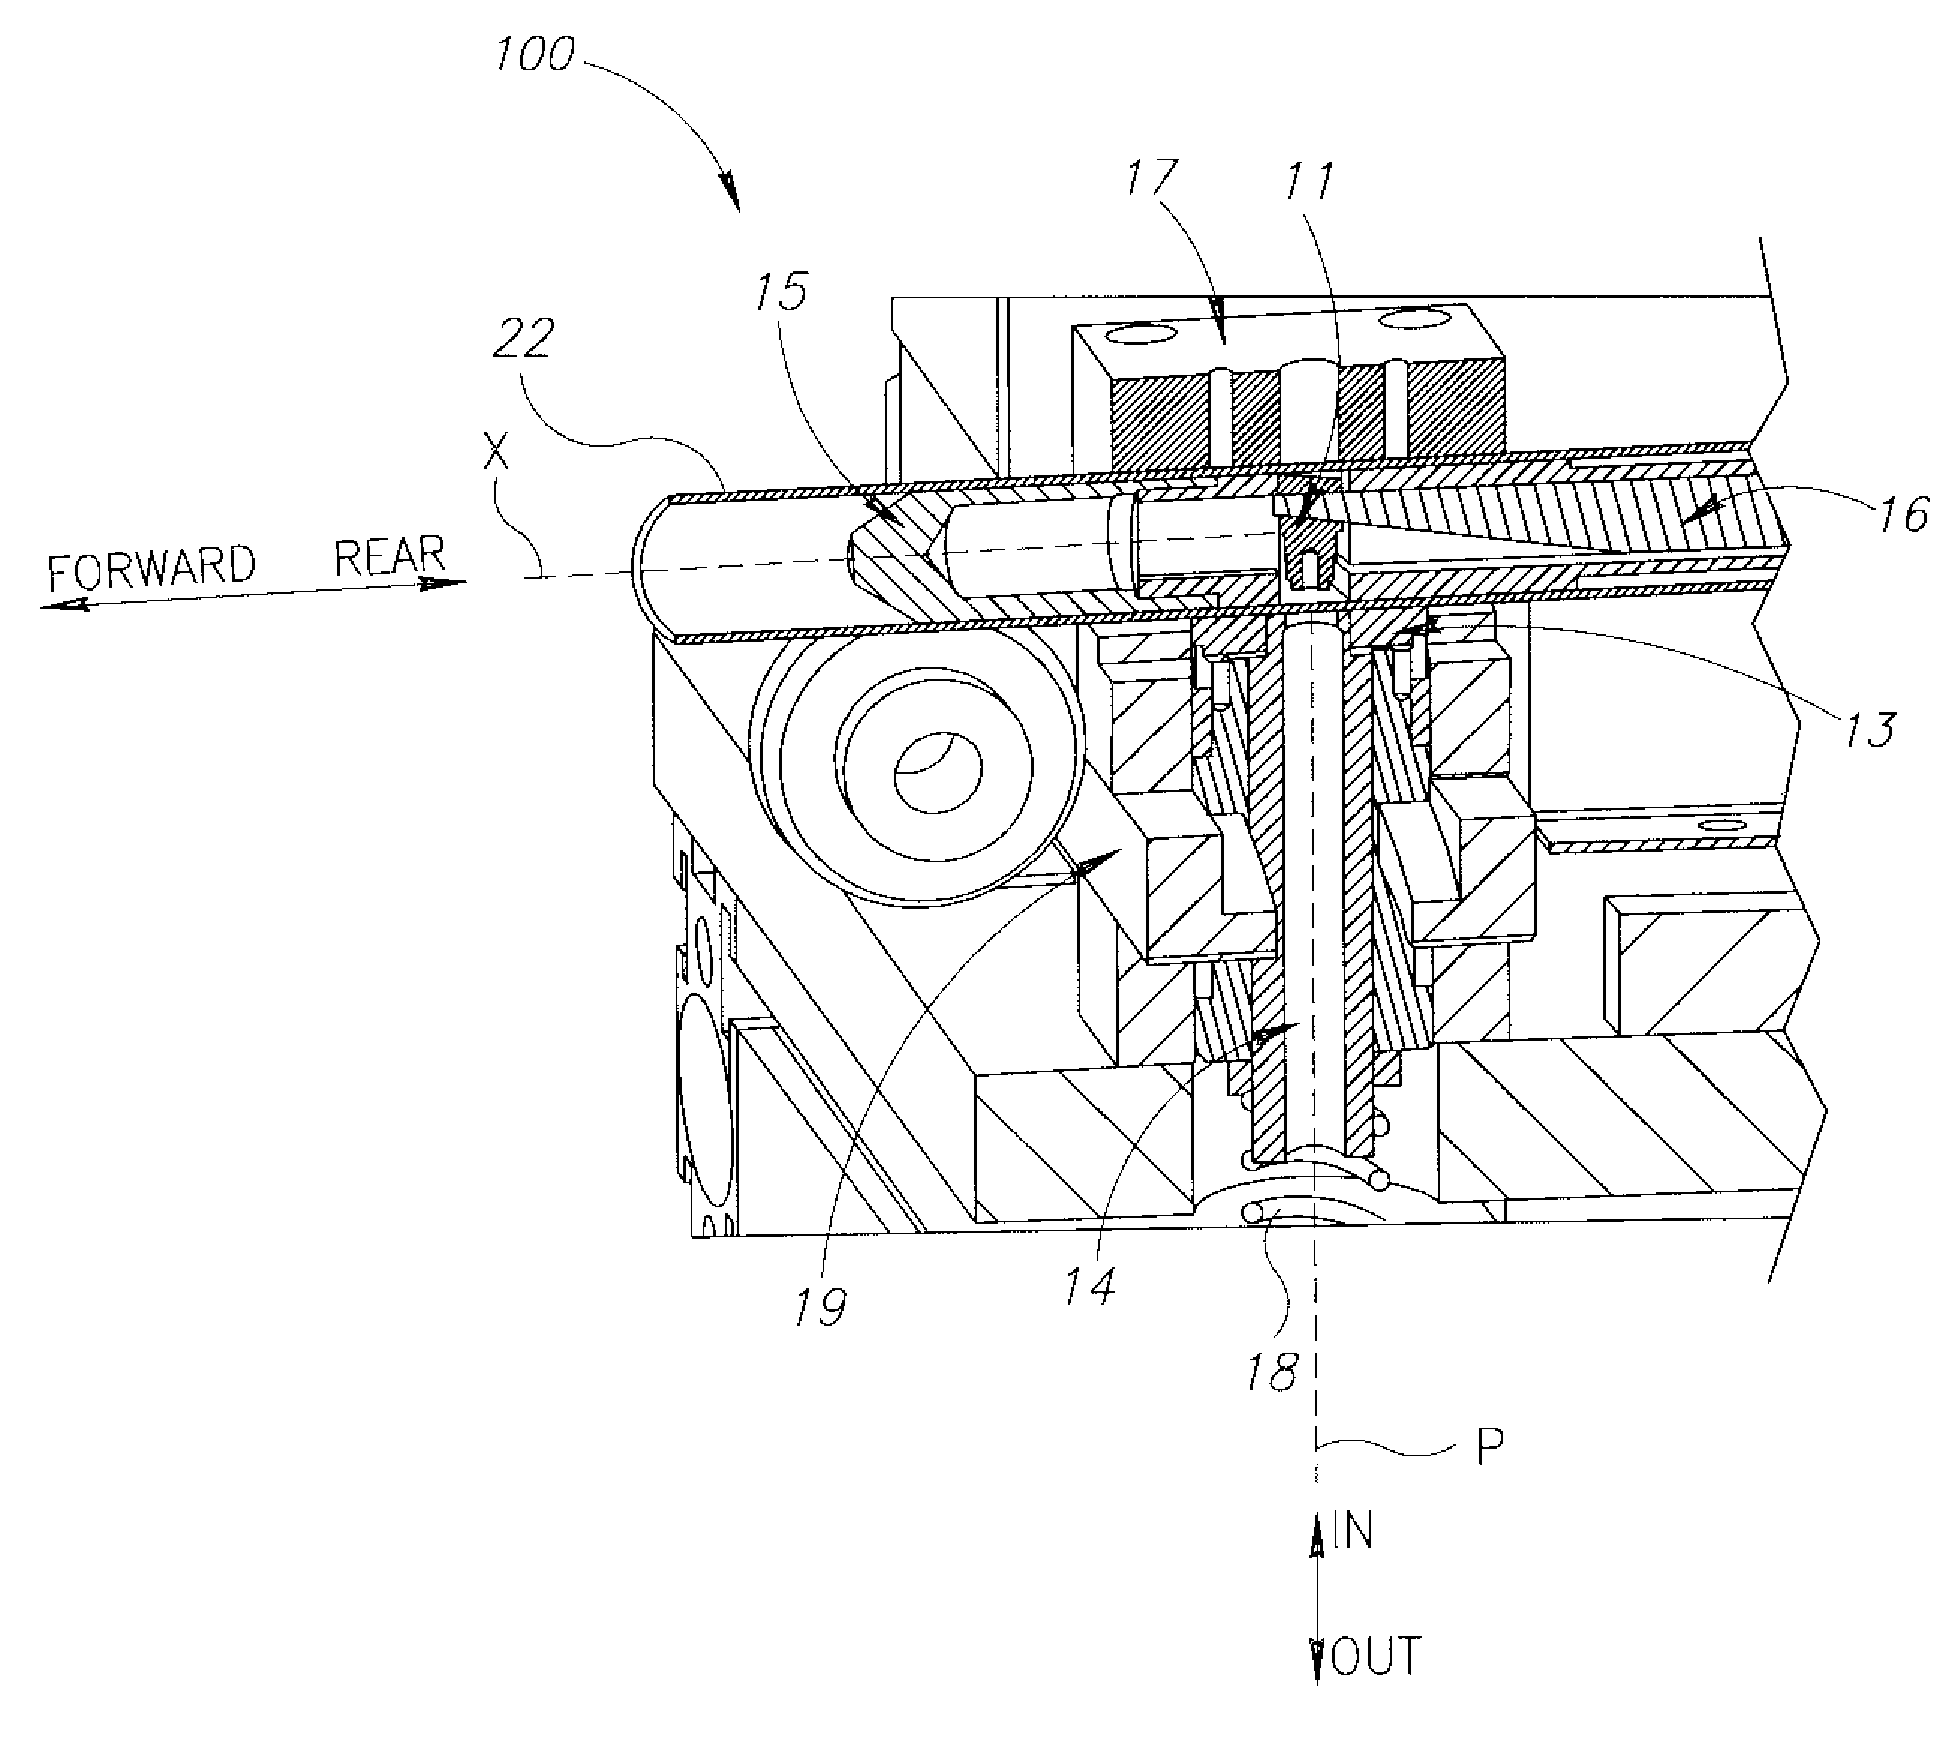 Tube punching and collaring system, device and method